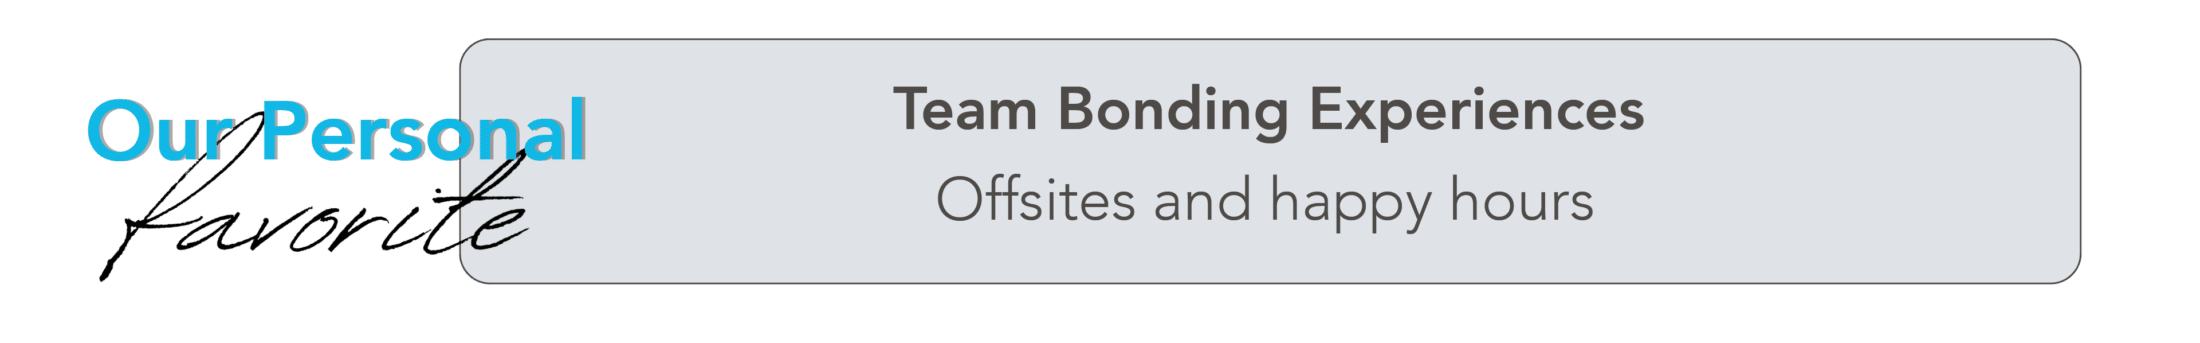 WeInfuse bonding experiences